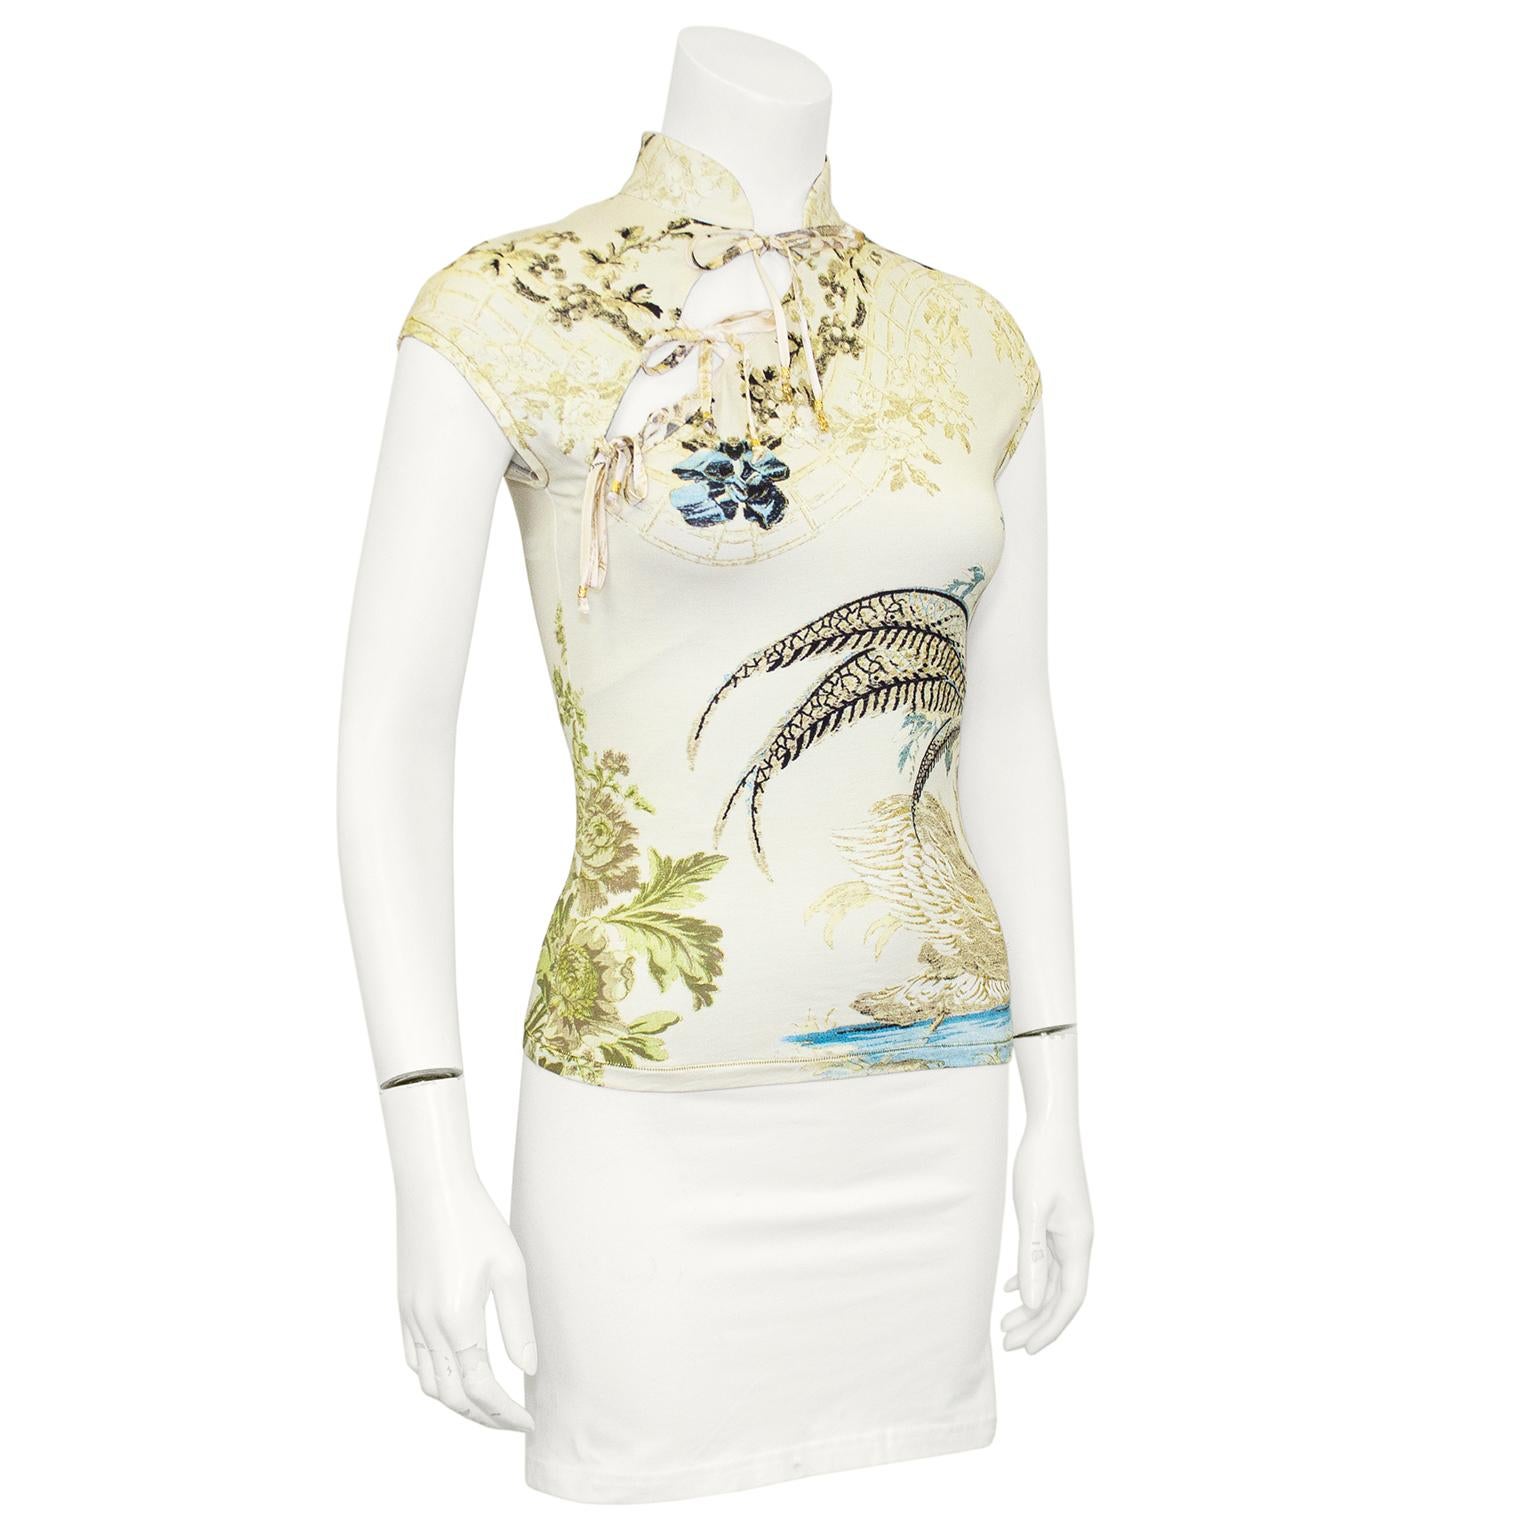 Roberto Cavalli mesh jersey top from S/S 2003. Cheongsam style featuring a Mandarin collar with a diagonal slit that fastens with three ties. Cream with a beautiful Chinoiserie inspired print featuring florals, lattice a pheasant tail and a swan